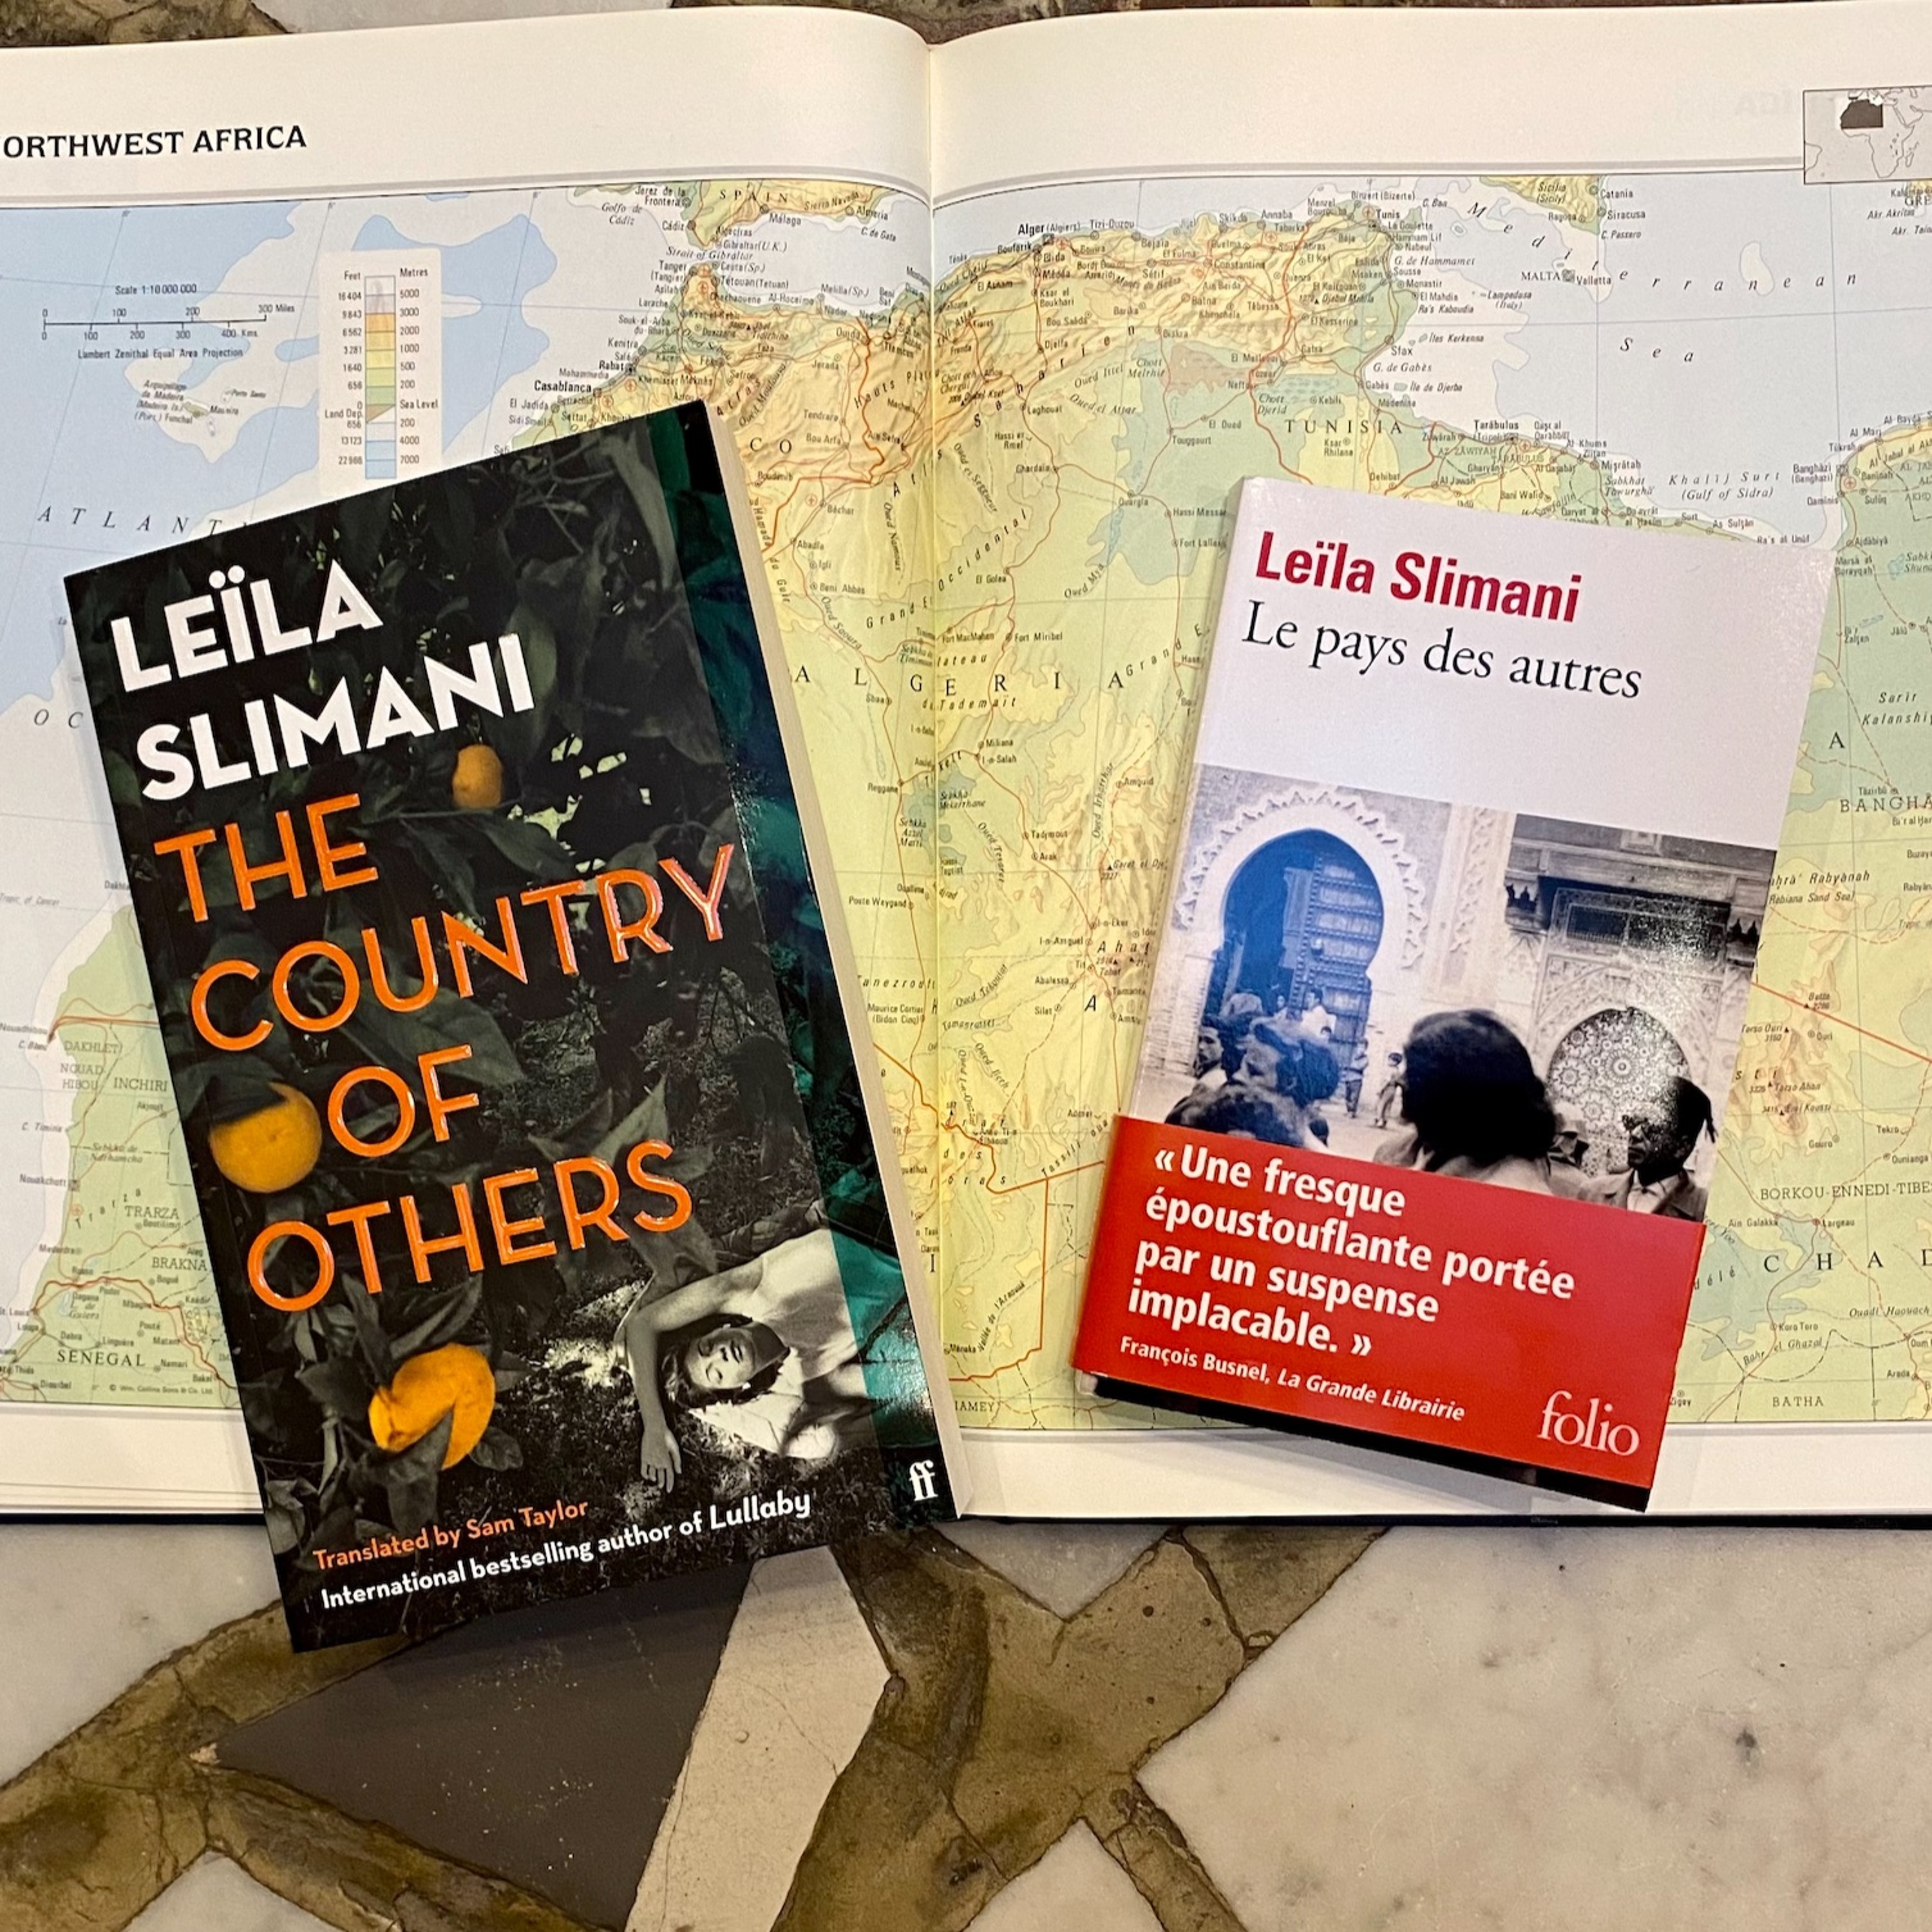 Leïla Slimani on The Country of Others